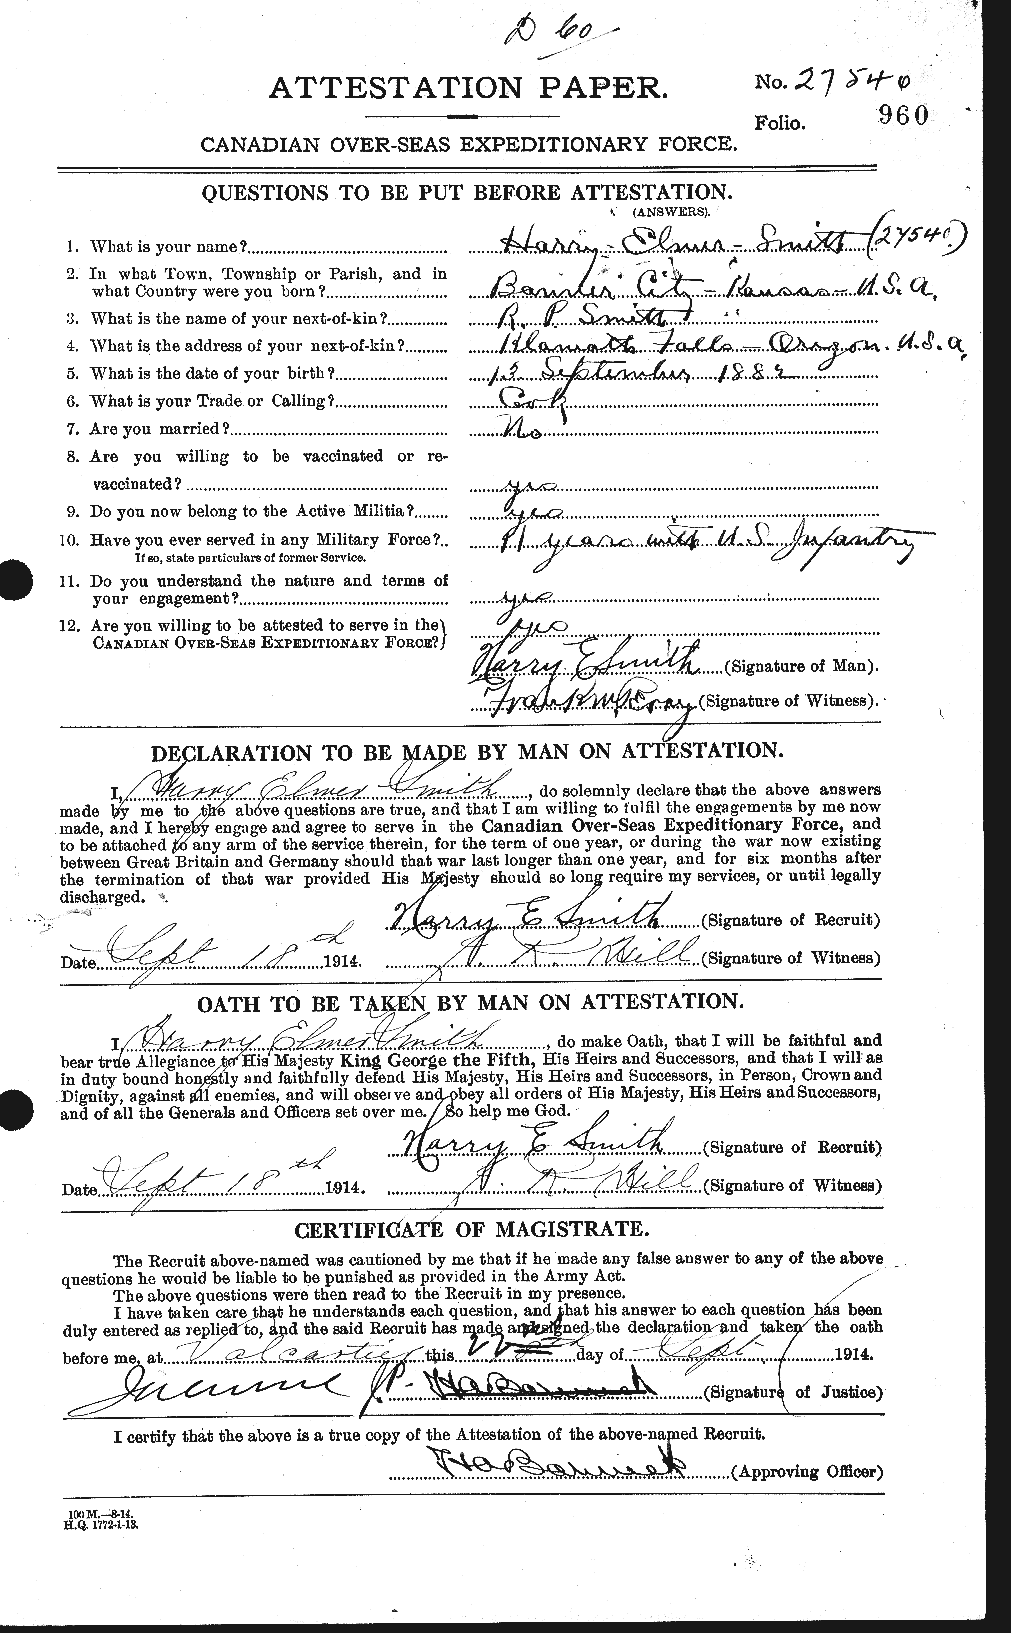 Personnel Records of the First World War - CEF 105582a